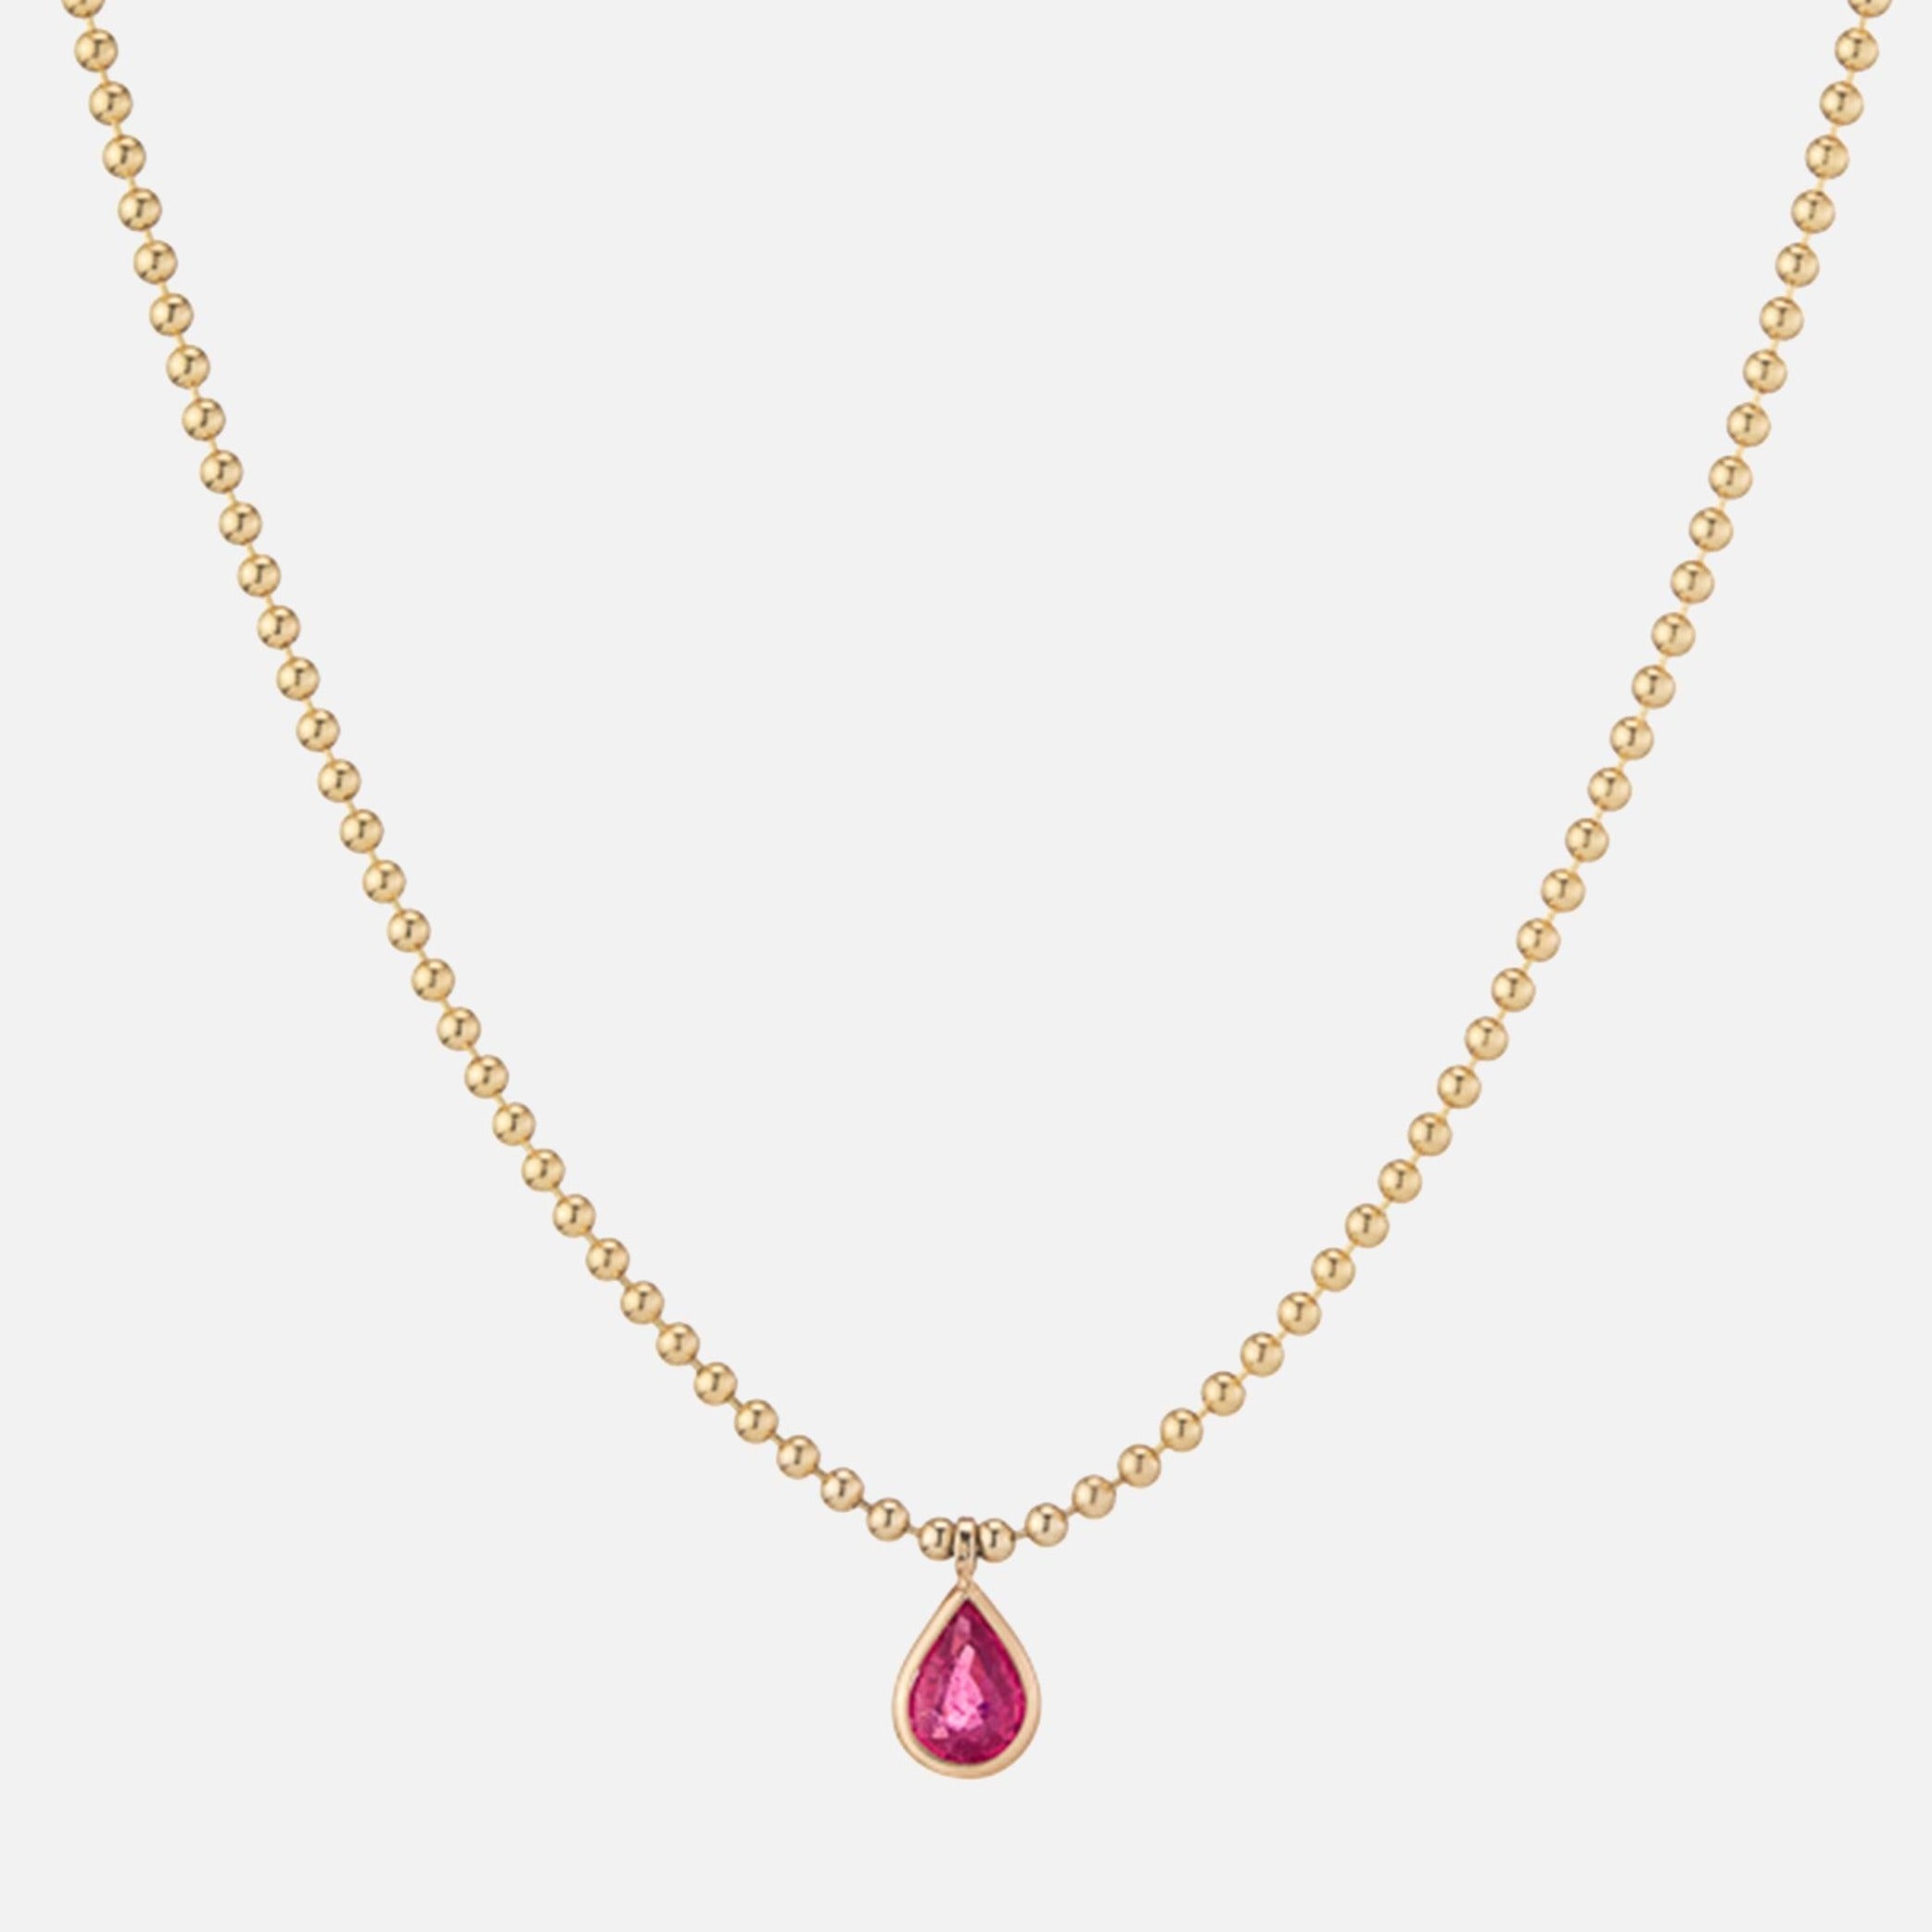 Pink Tourmaline Ball Chain Necklace - At Present - At Present